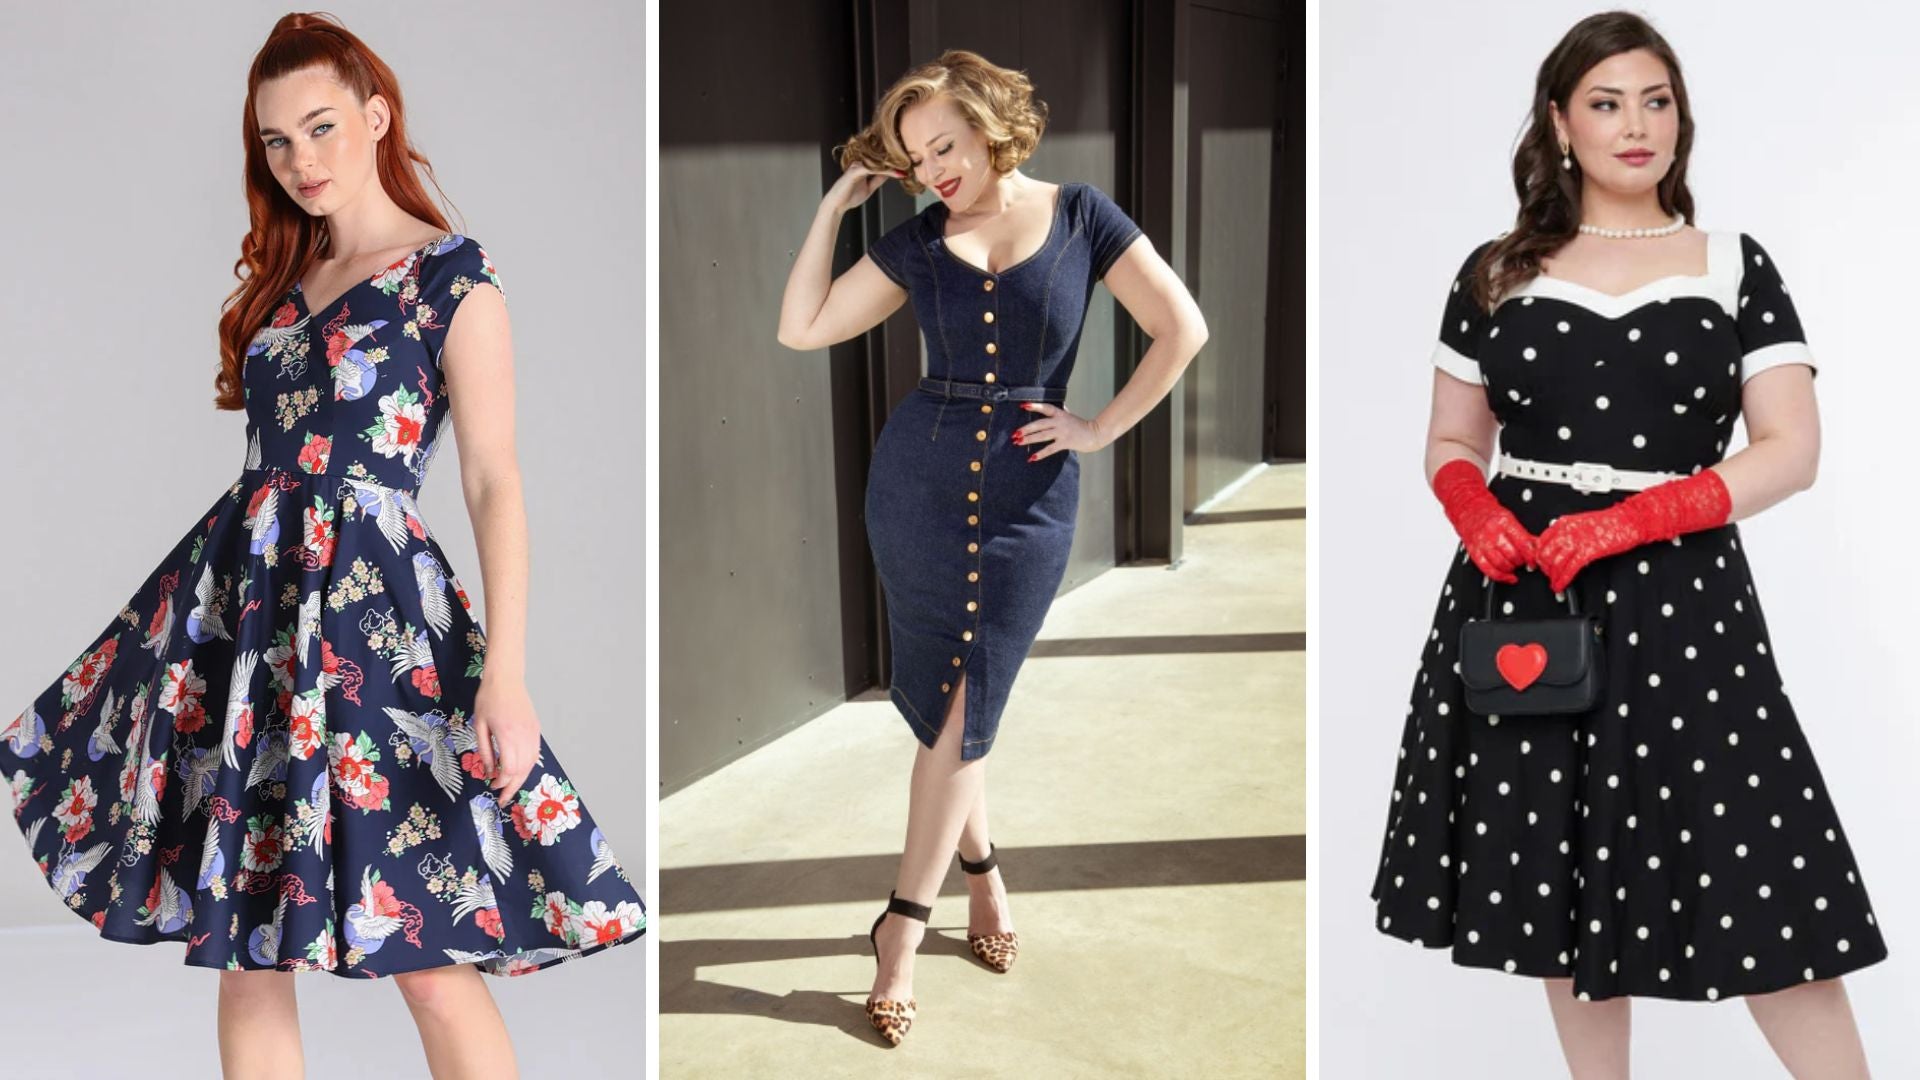 Turn Up The Heat: Rockabilly Dresses That Sizzle This Summer